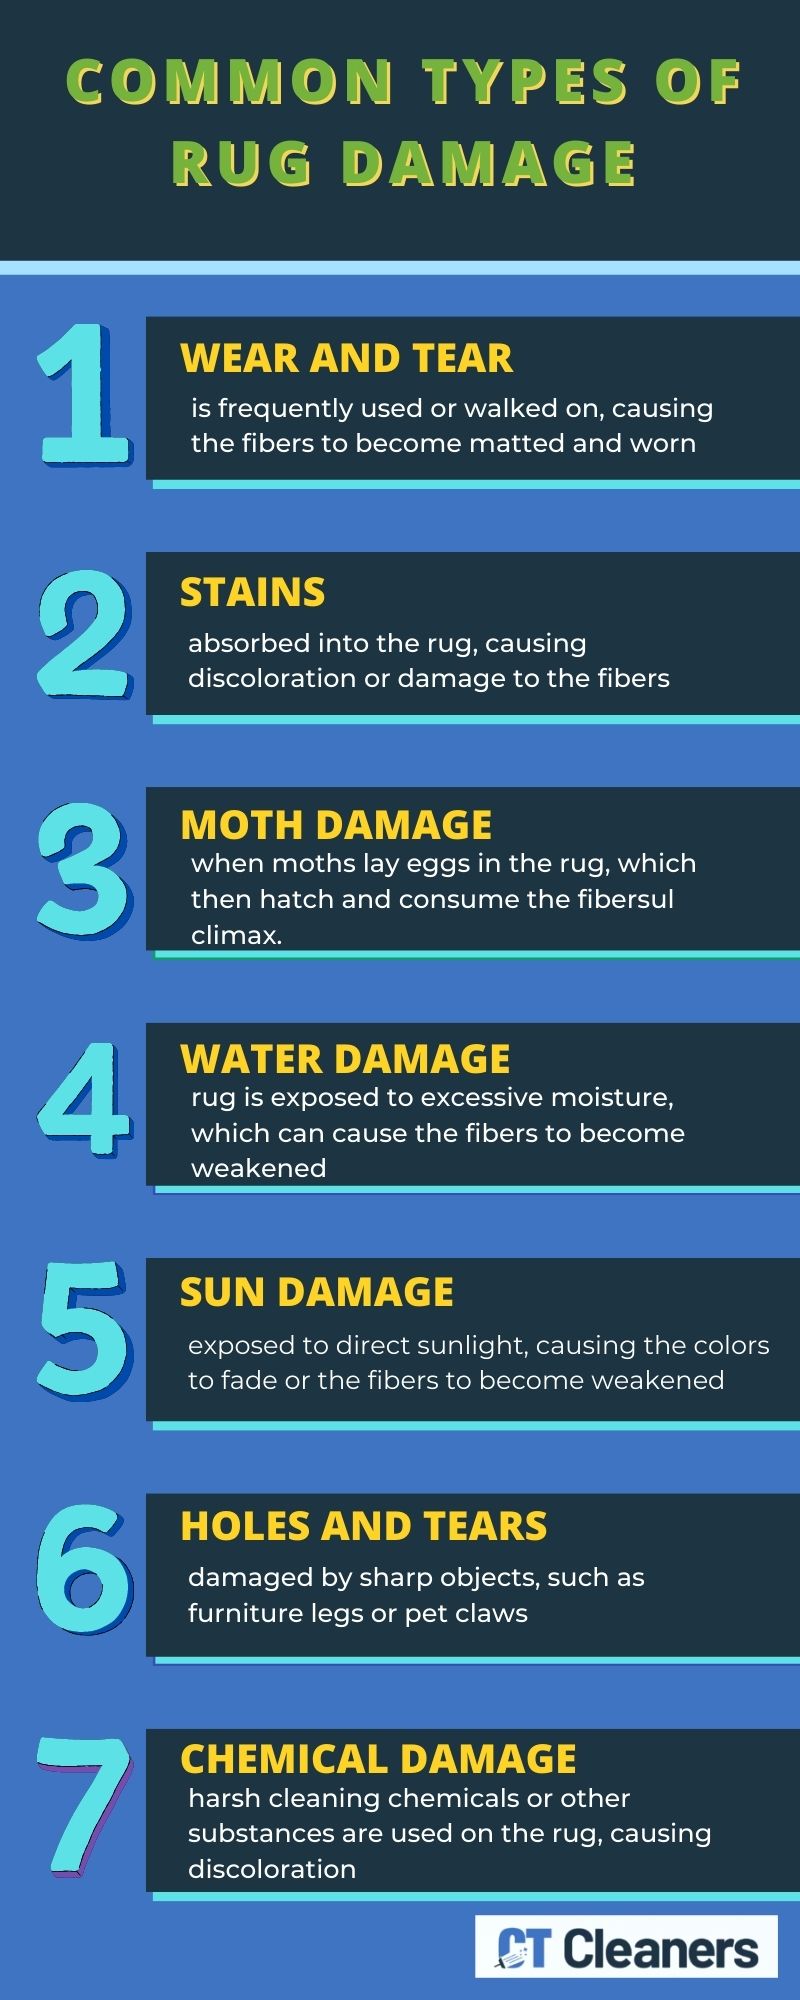 Common Types of Rug Damage